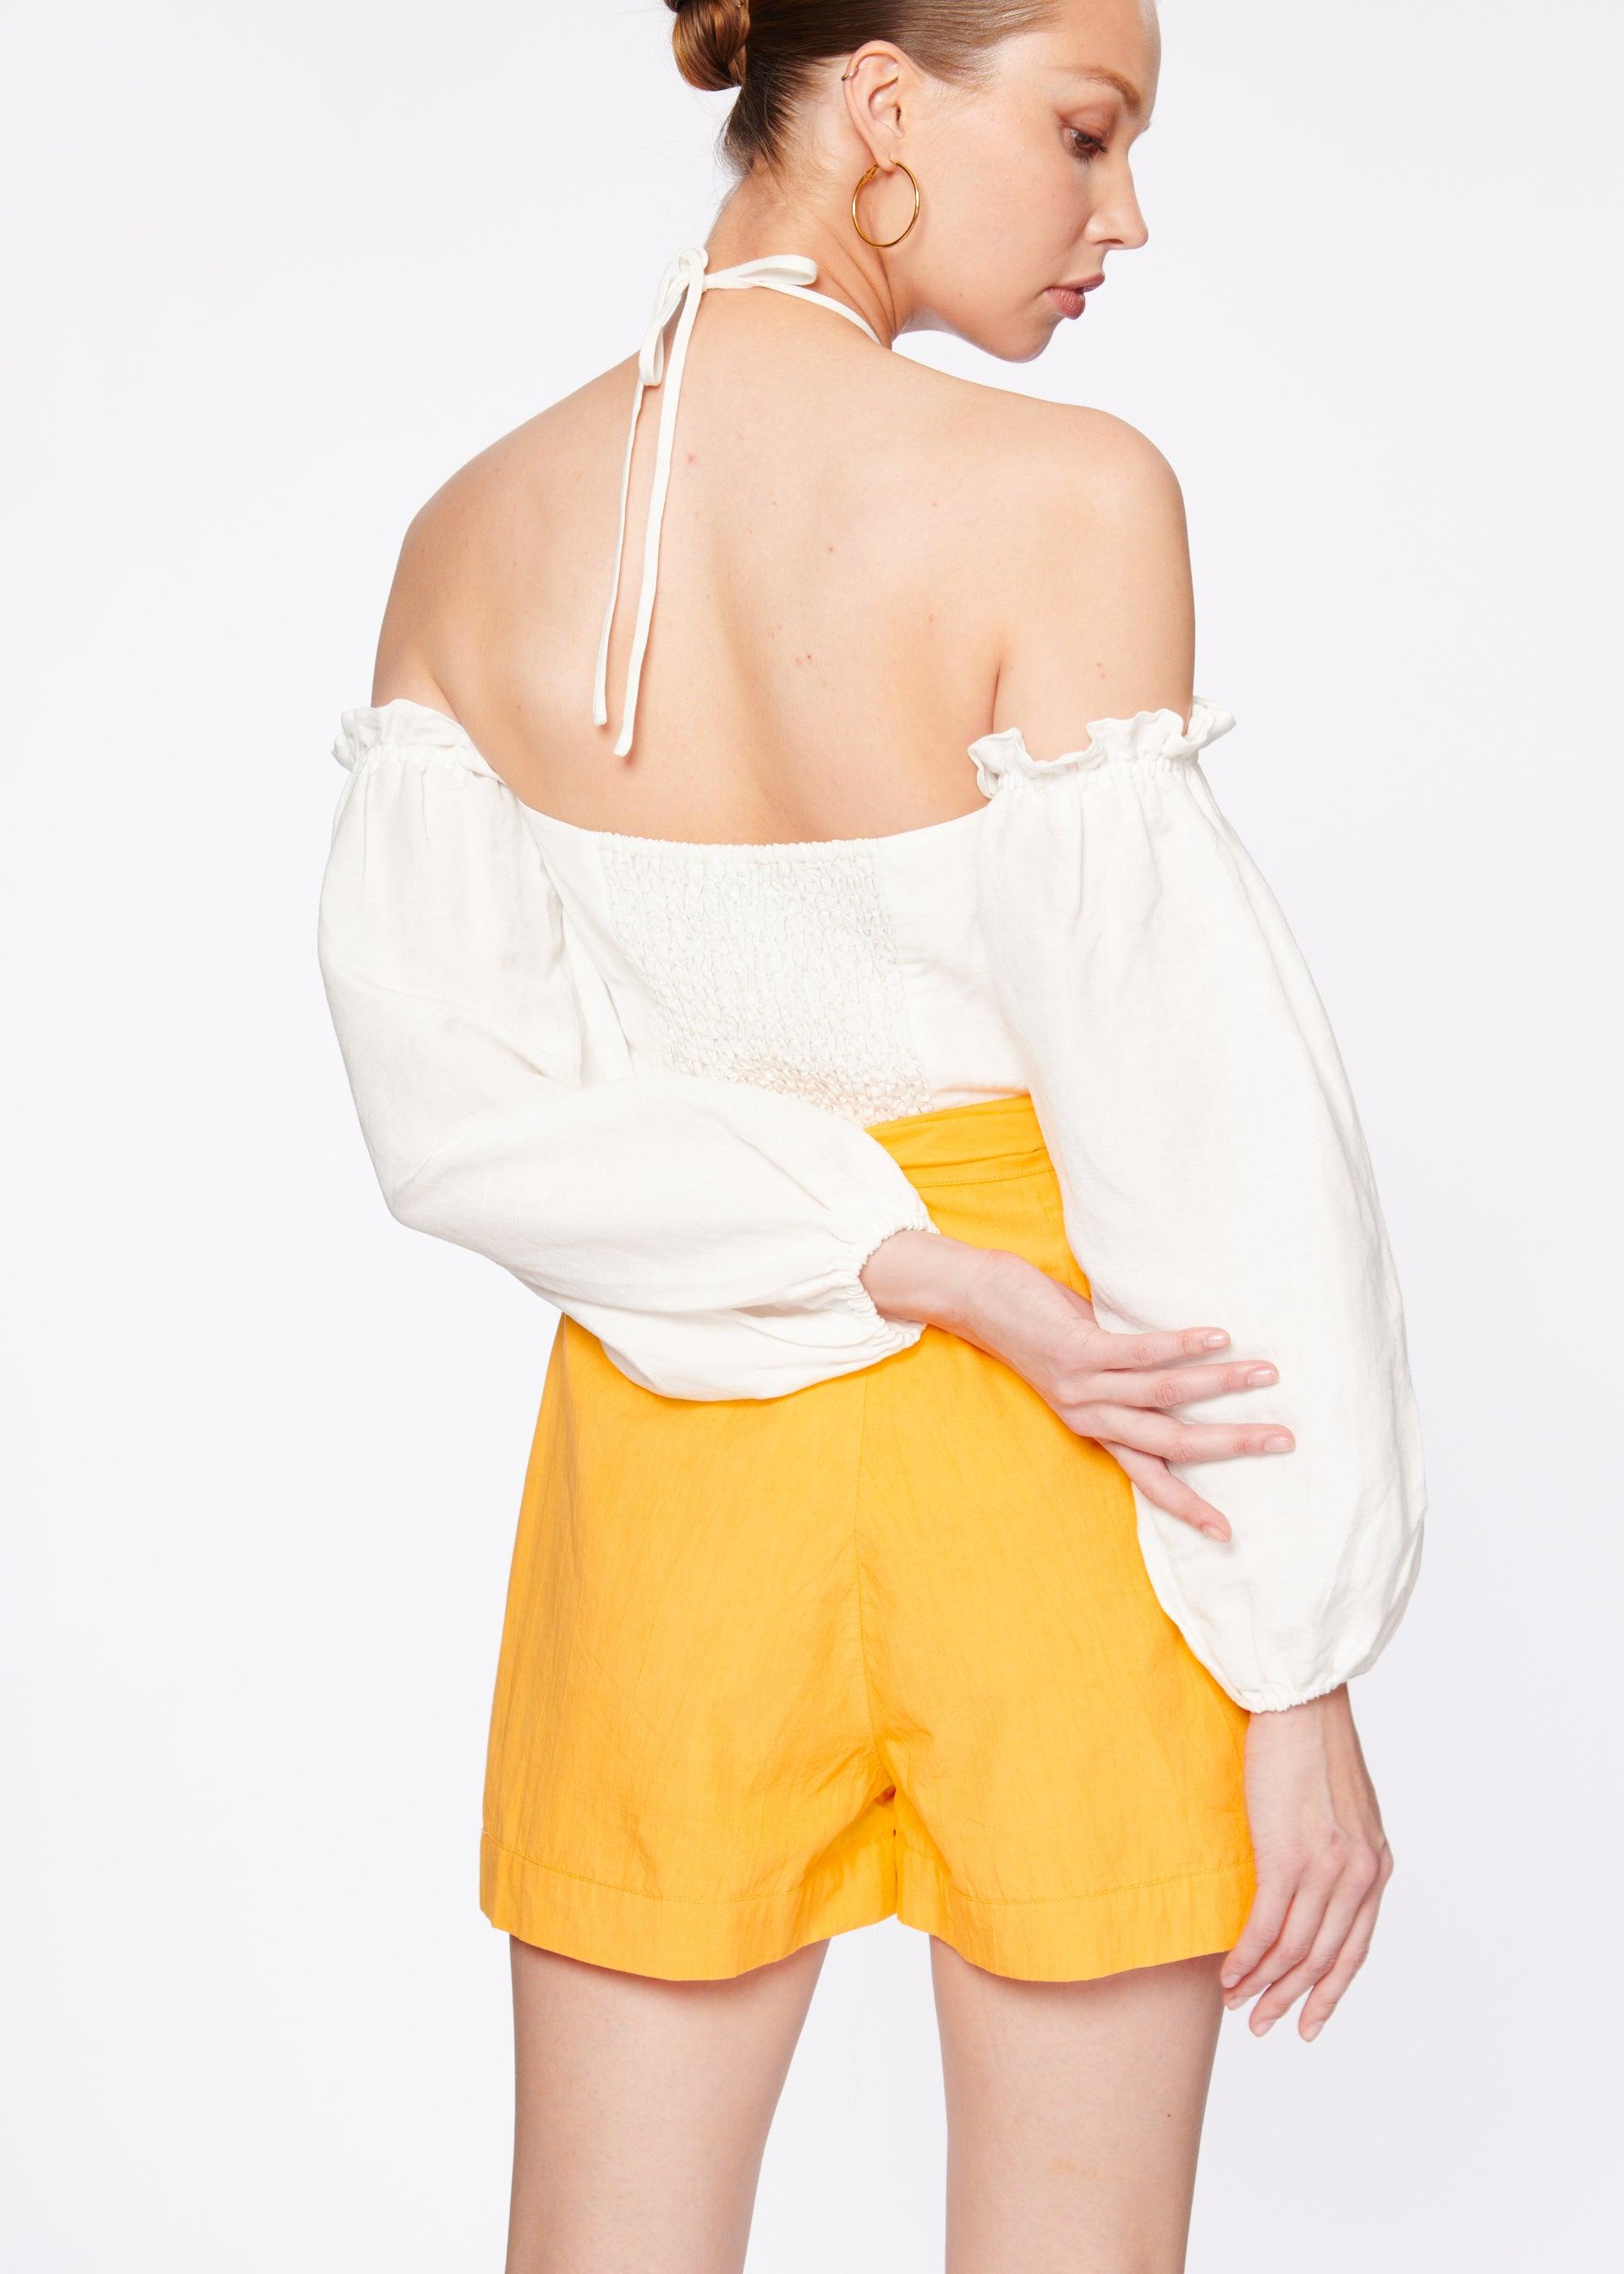 Cami NYC Linen Delila Top in White | Lyst